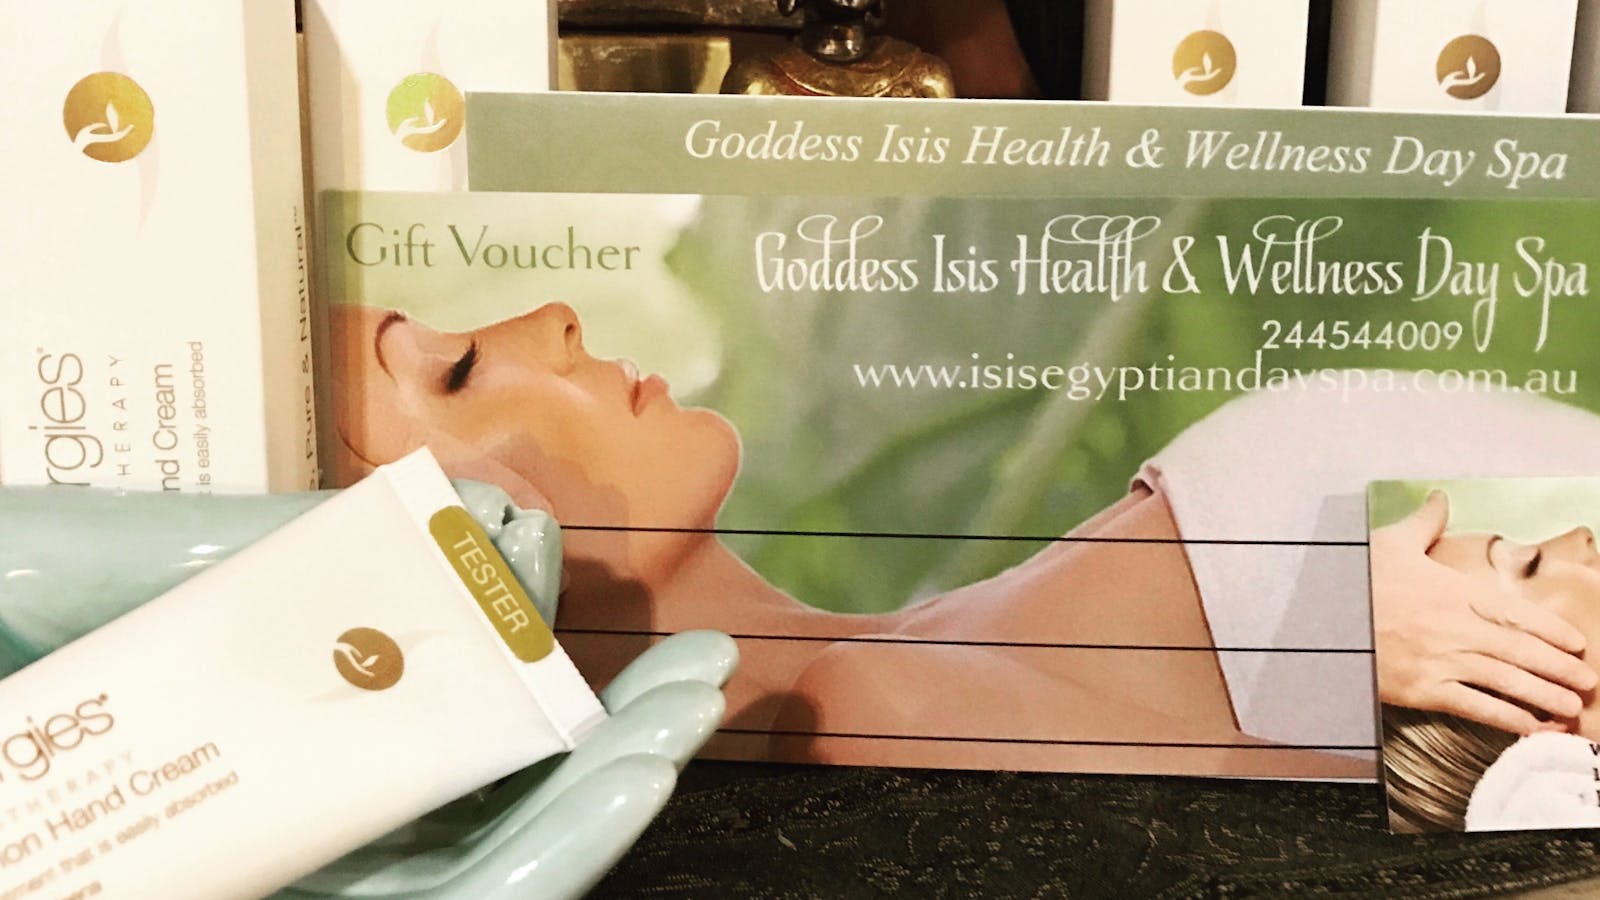 Gift vouchers to spoil the person you love